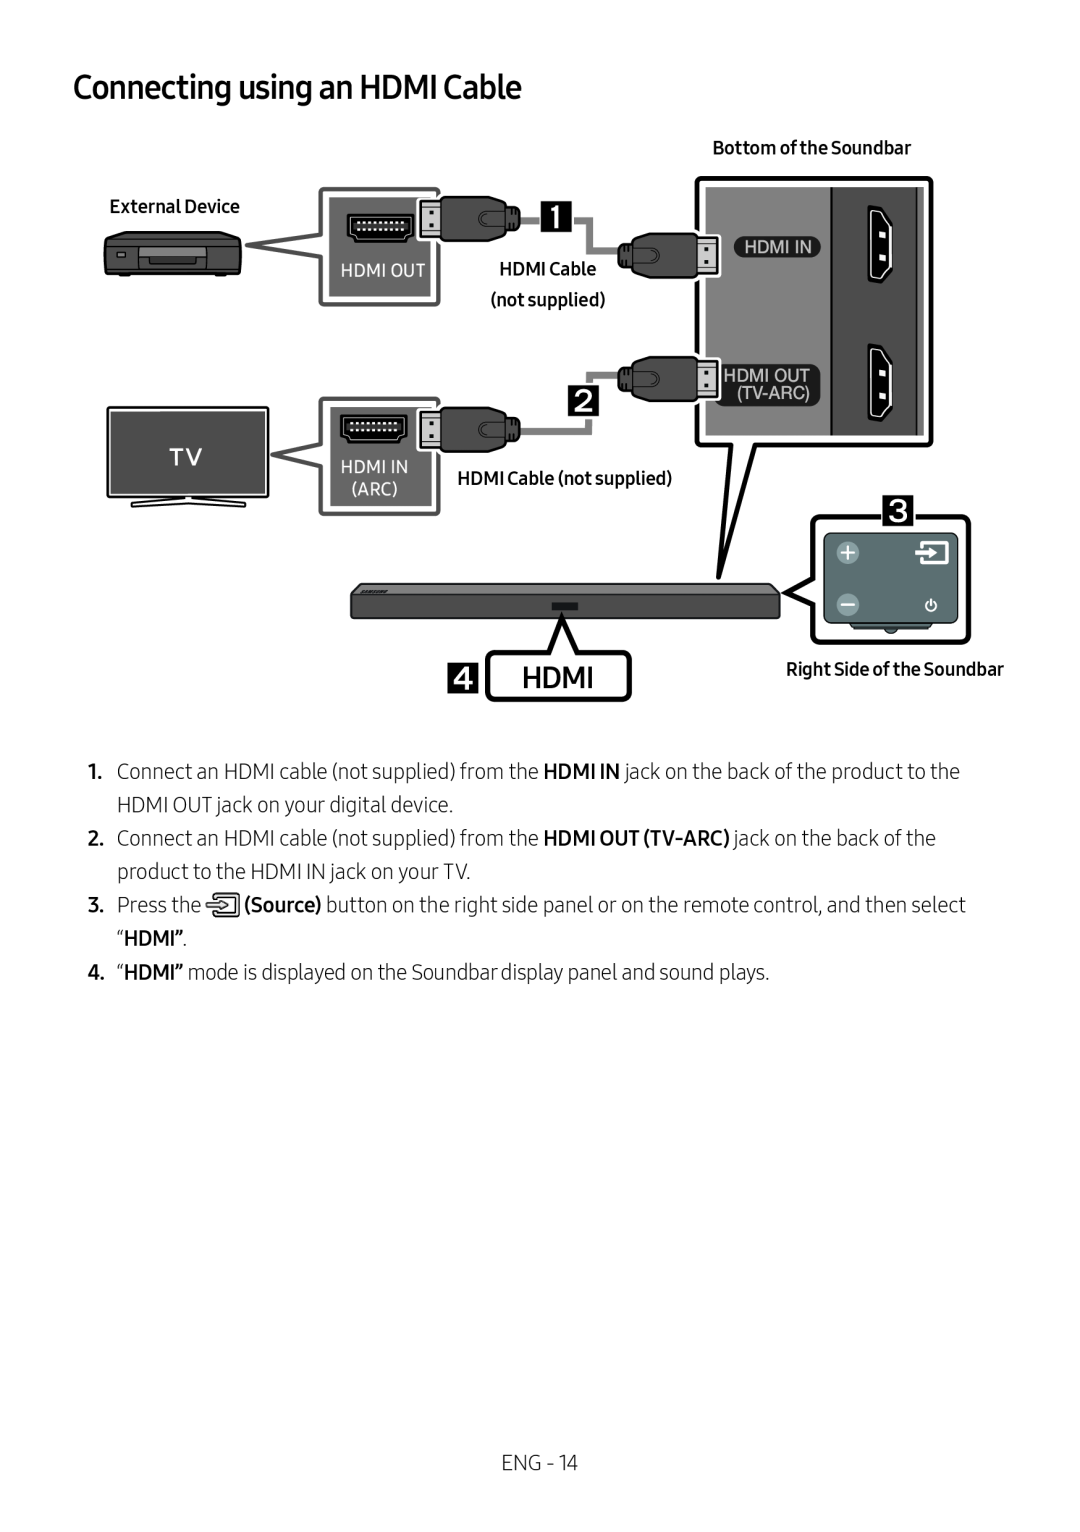 Samsung HW-M450/ZF, HW-M450/EN, HW-M450/ZG, HW-M460/XE manual Connecting using an HDMI Cable,  Hdmi 